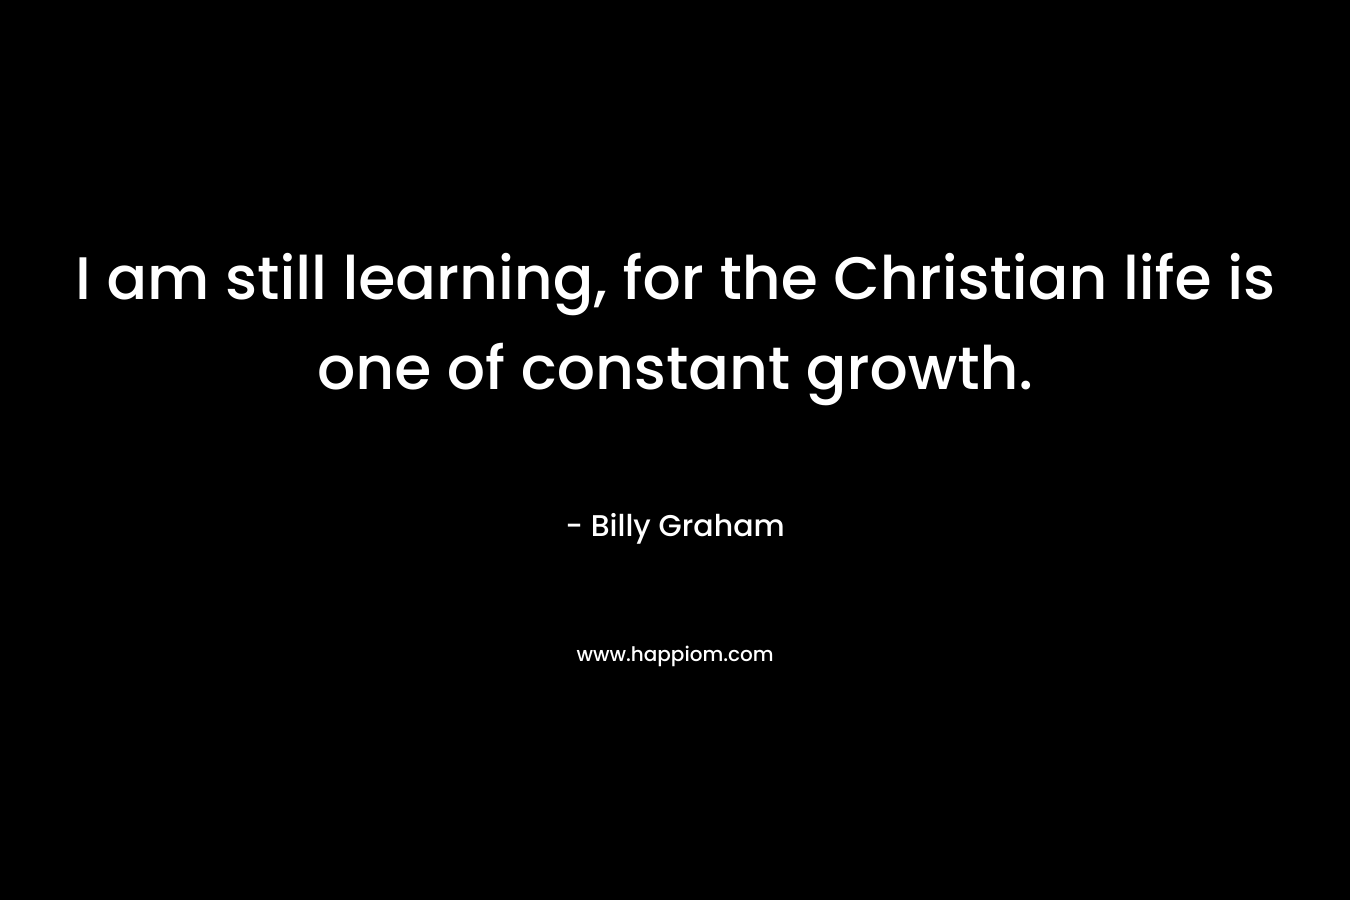 I am still learning, for the Christian life is one of constant growth.